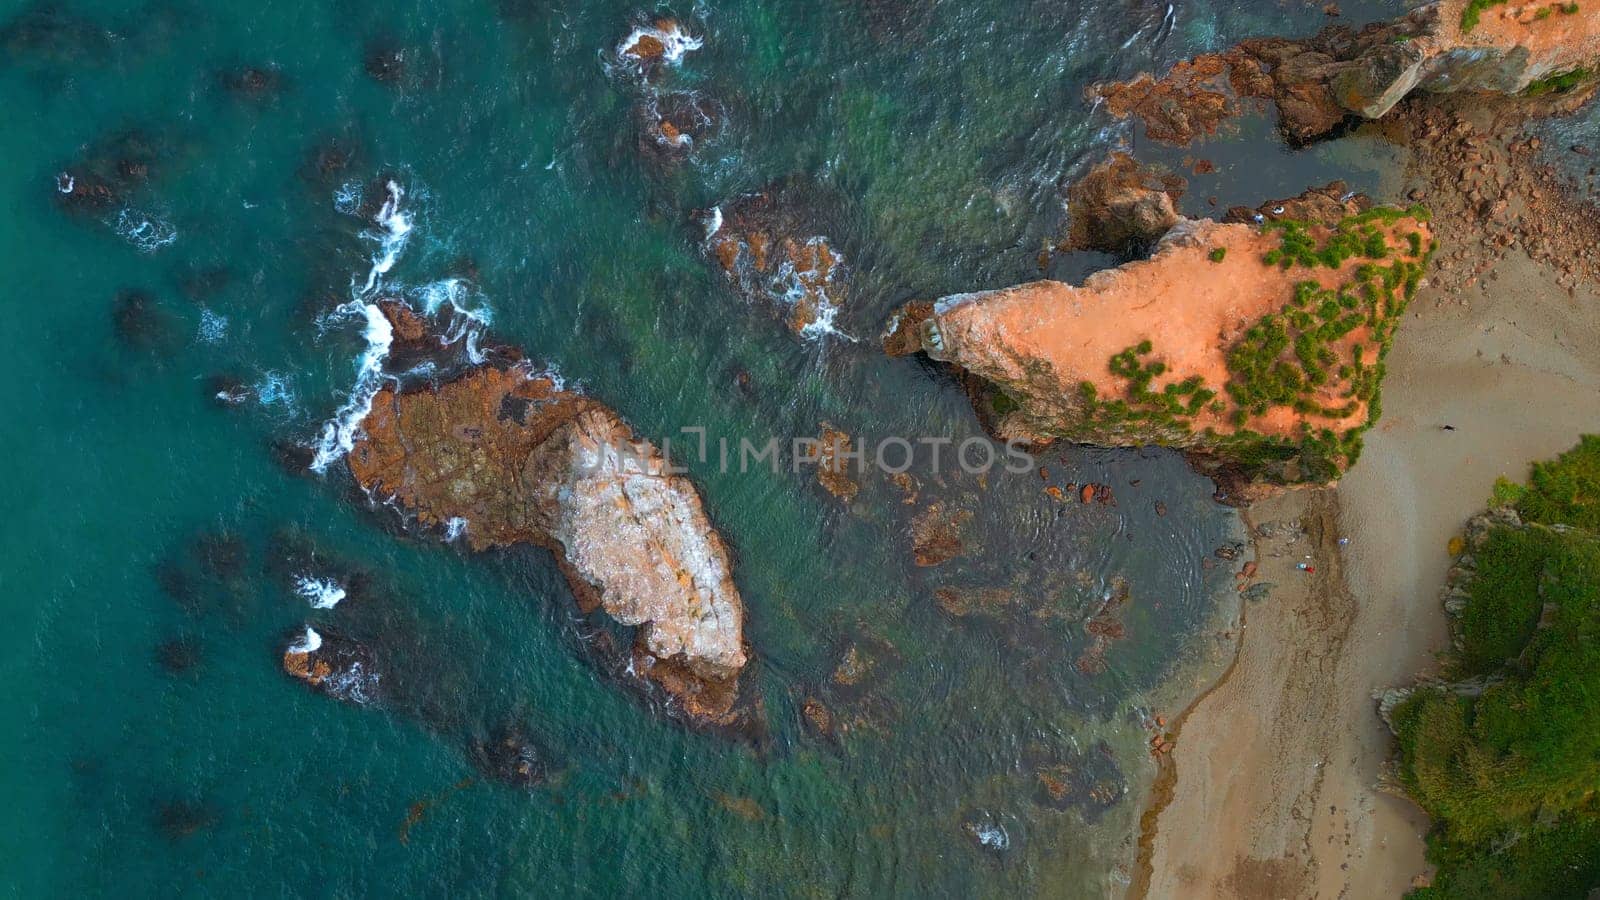 Top view of beautiful wild coast with rocks in water. Clip. Coastline with rocks and waves near shore. Inspiring nature of sea coast with variety of rocks.